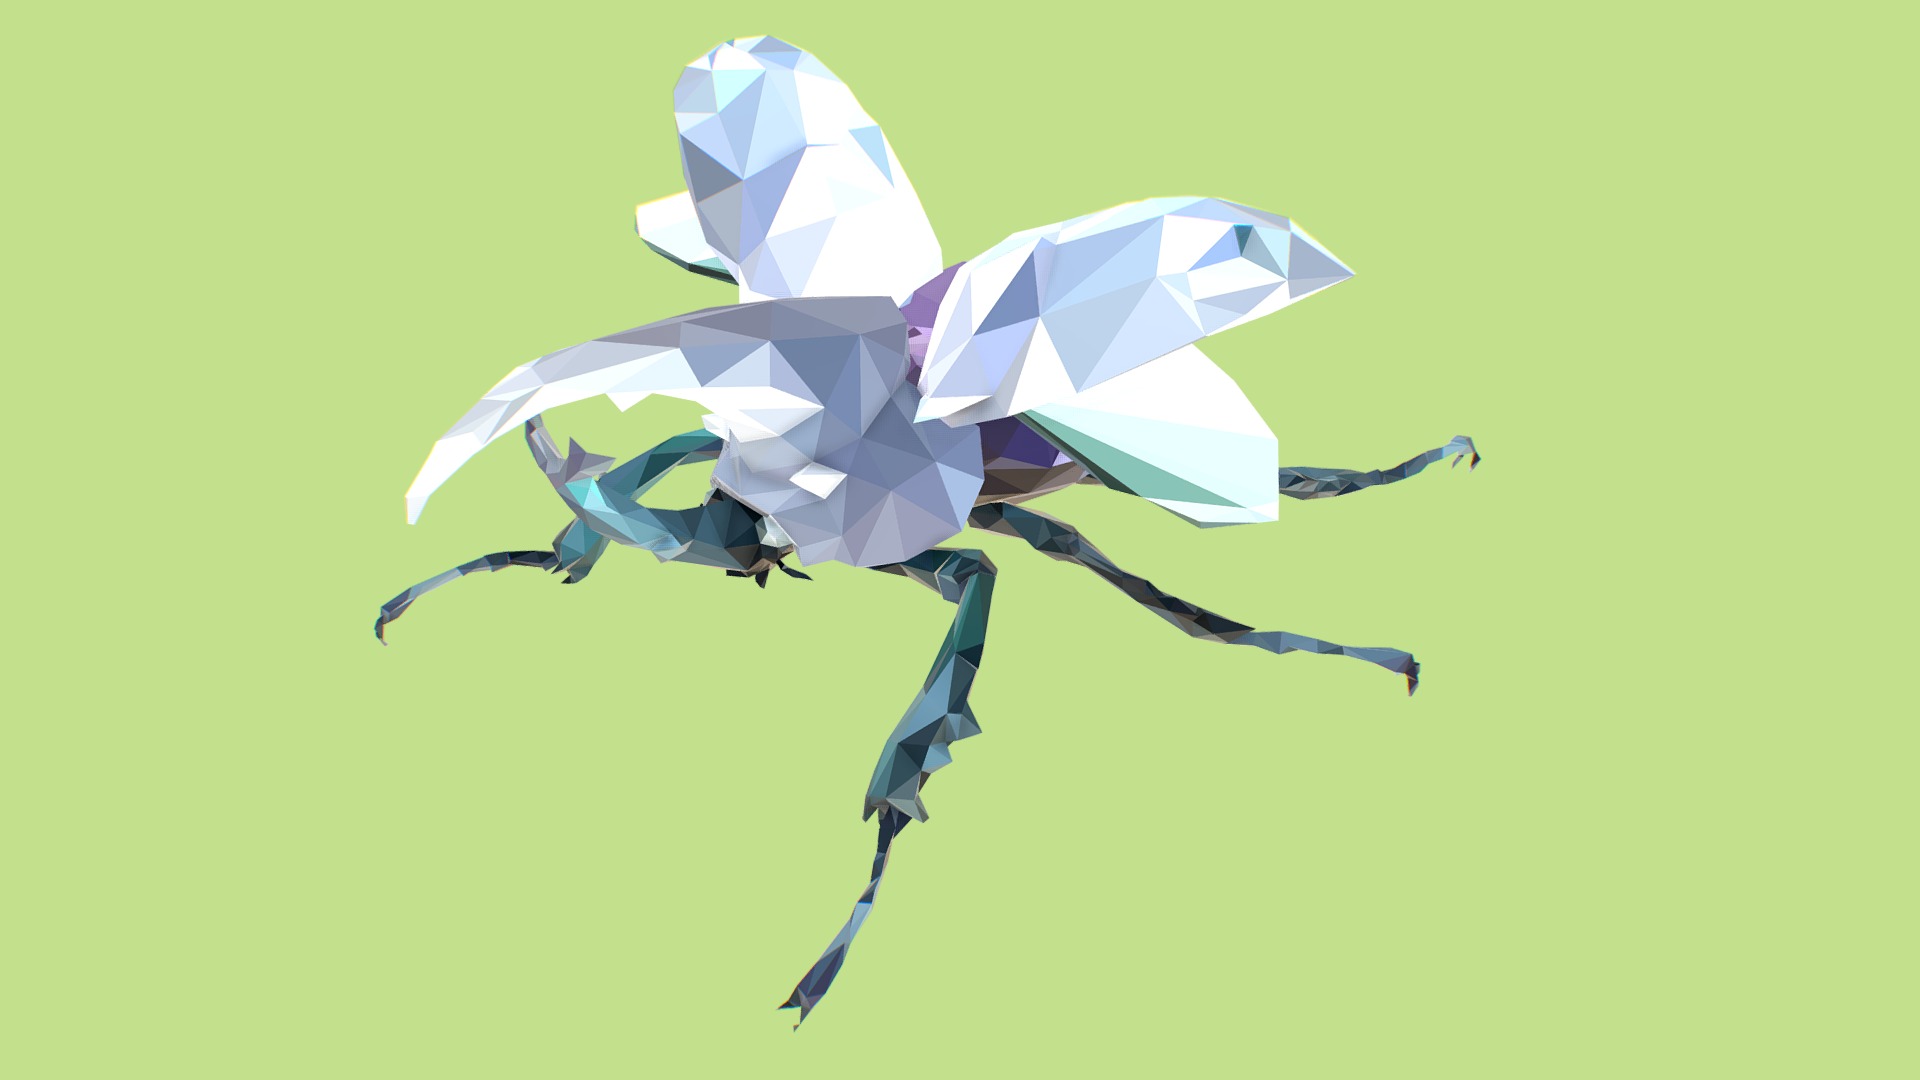 3D model Low Poly Art Giant Beetle Rino Insect - This is a 3D model of the Low Poly Art Giant Beetle Rino Insect. The 3D model is about a couple of small airplanes flying in the sky.